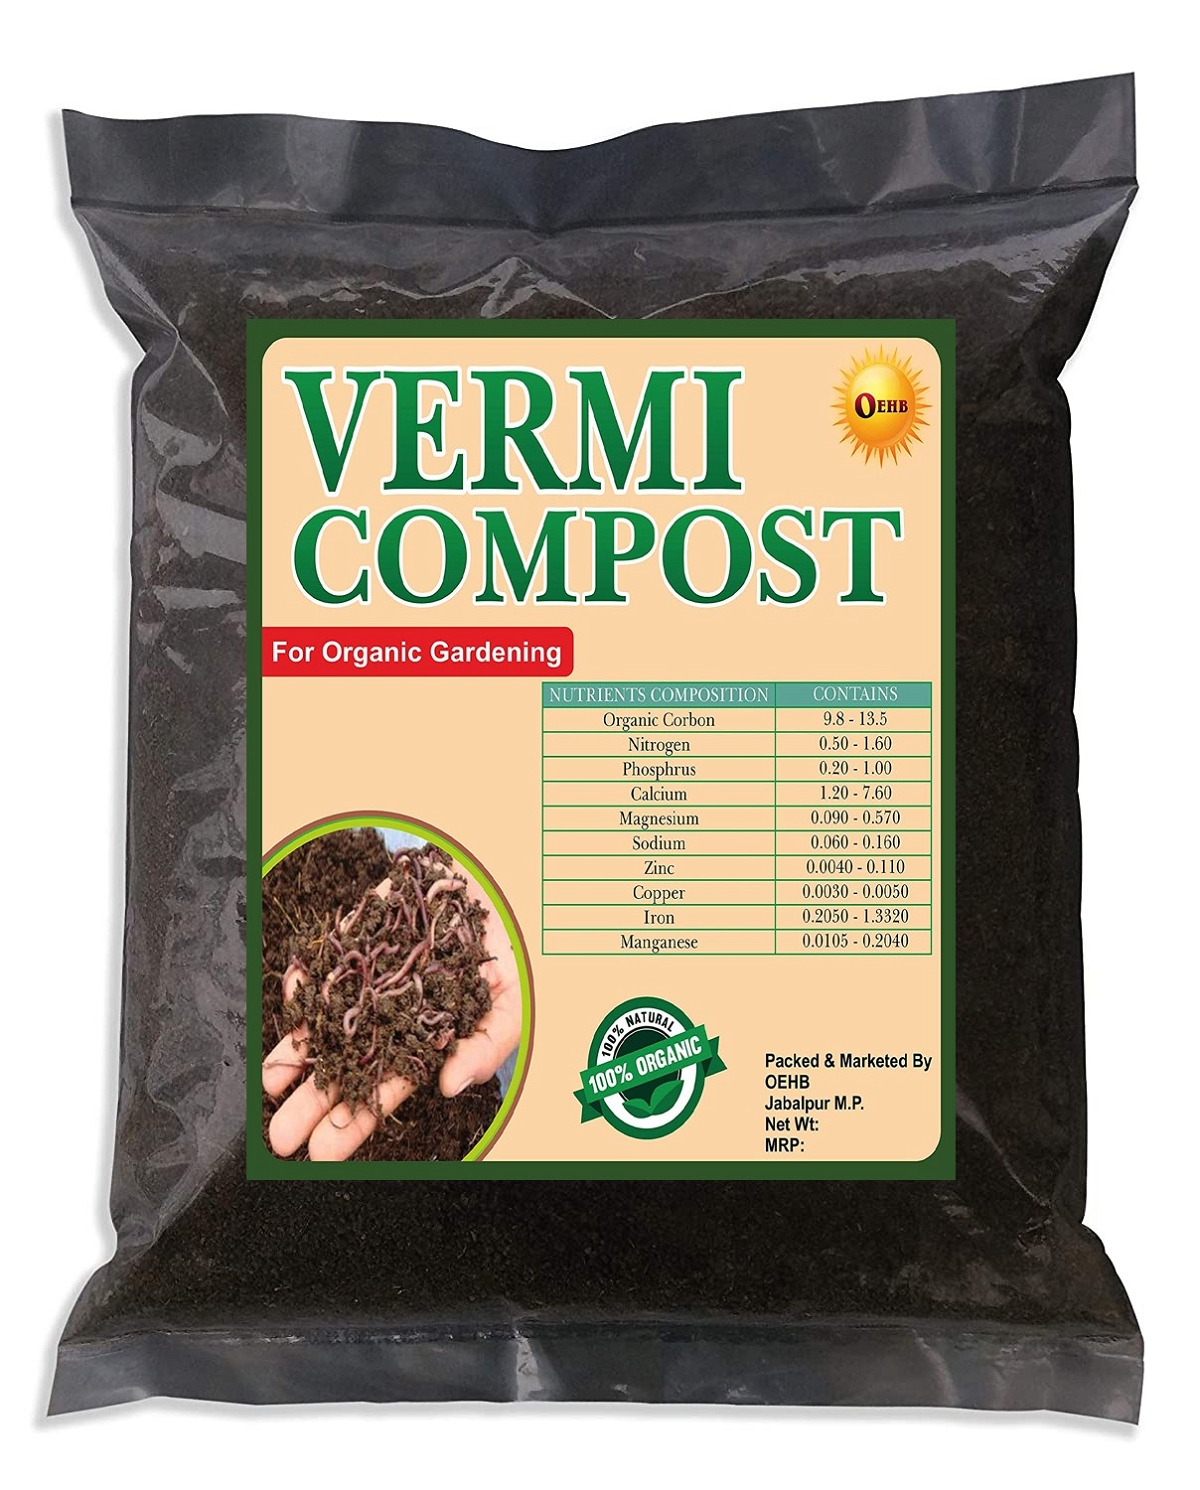 OEHB 3 in 1 100% Organic Neem Cake Powder 450gm, Vermicompost 900gm and Mustard Oil Cake 450gm (Total 1800gm) for Plant || Trace Garden || Indoor and Outdoor Plant